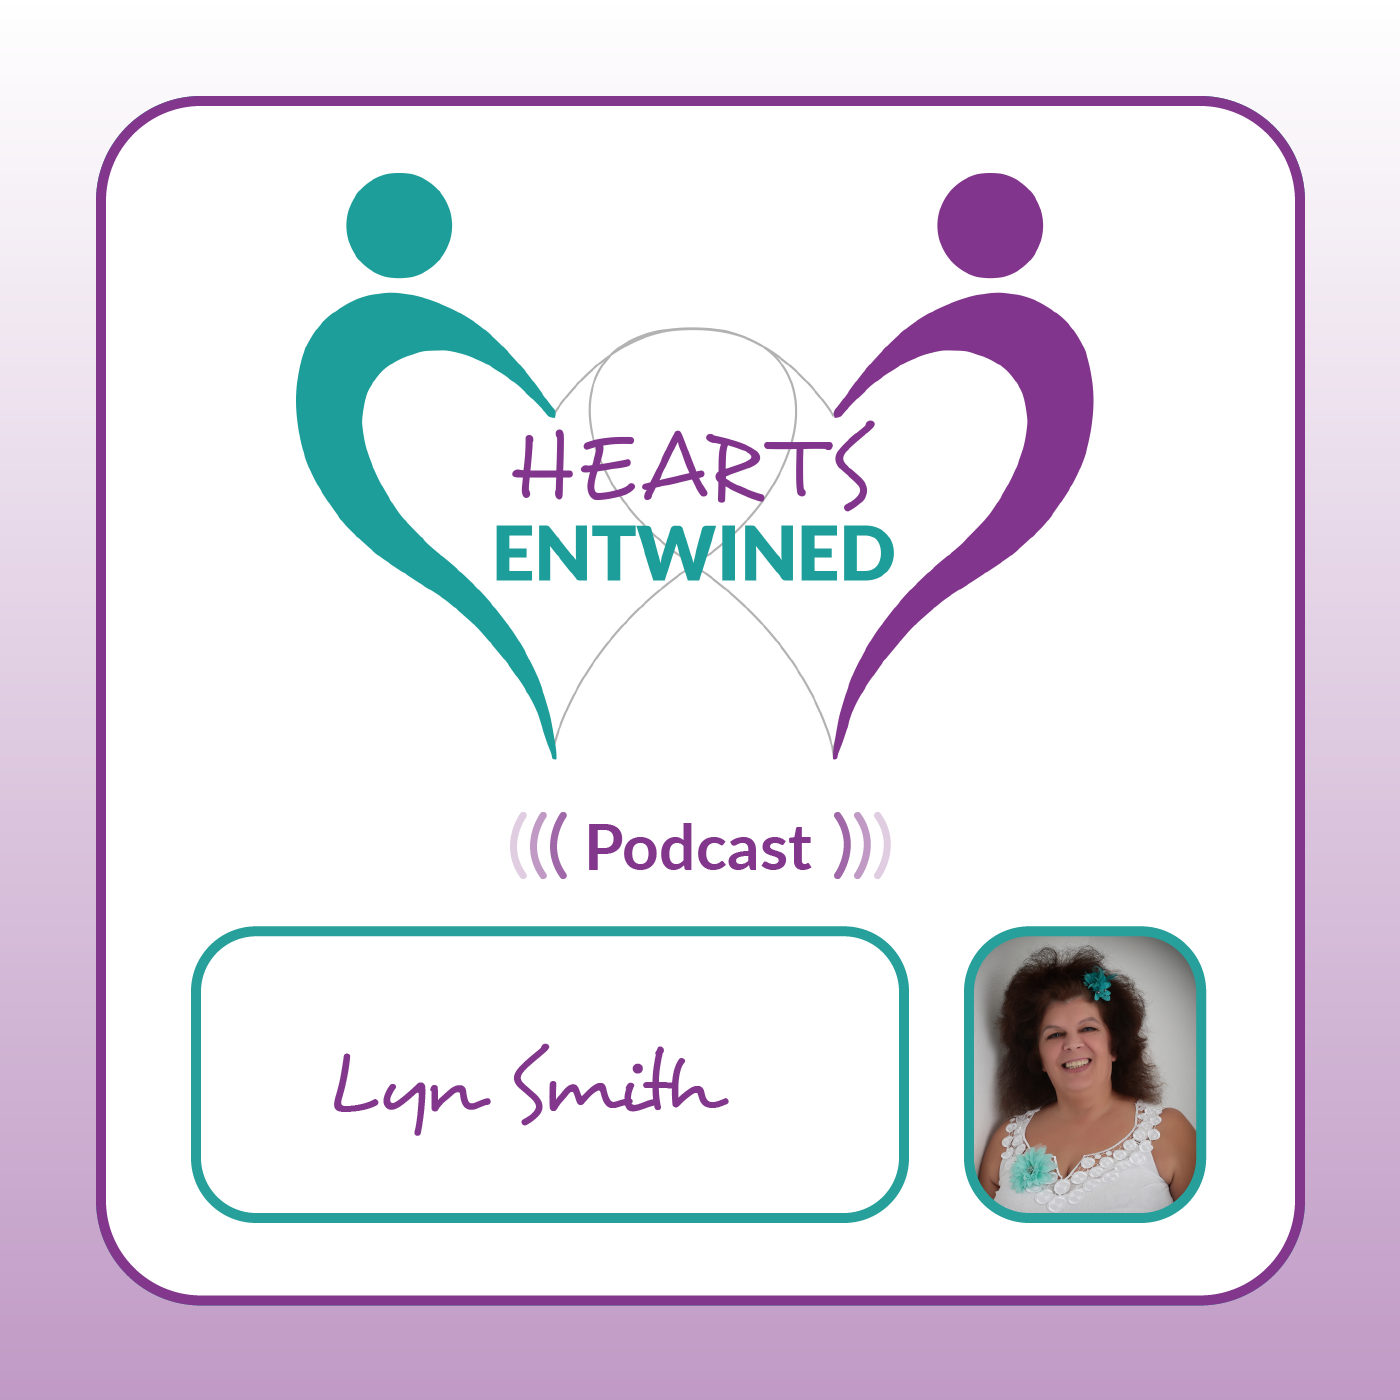 Over-Achieving Women Are You Having Trouble Attracting A Man? - Lyn Smith & Terica Wright